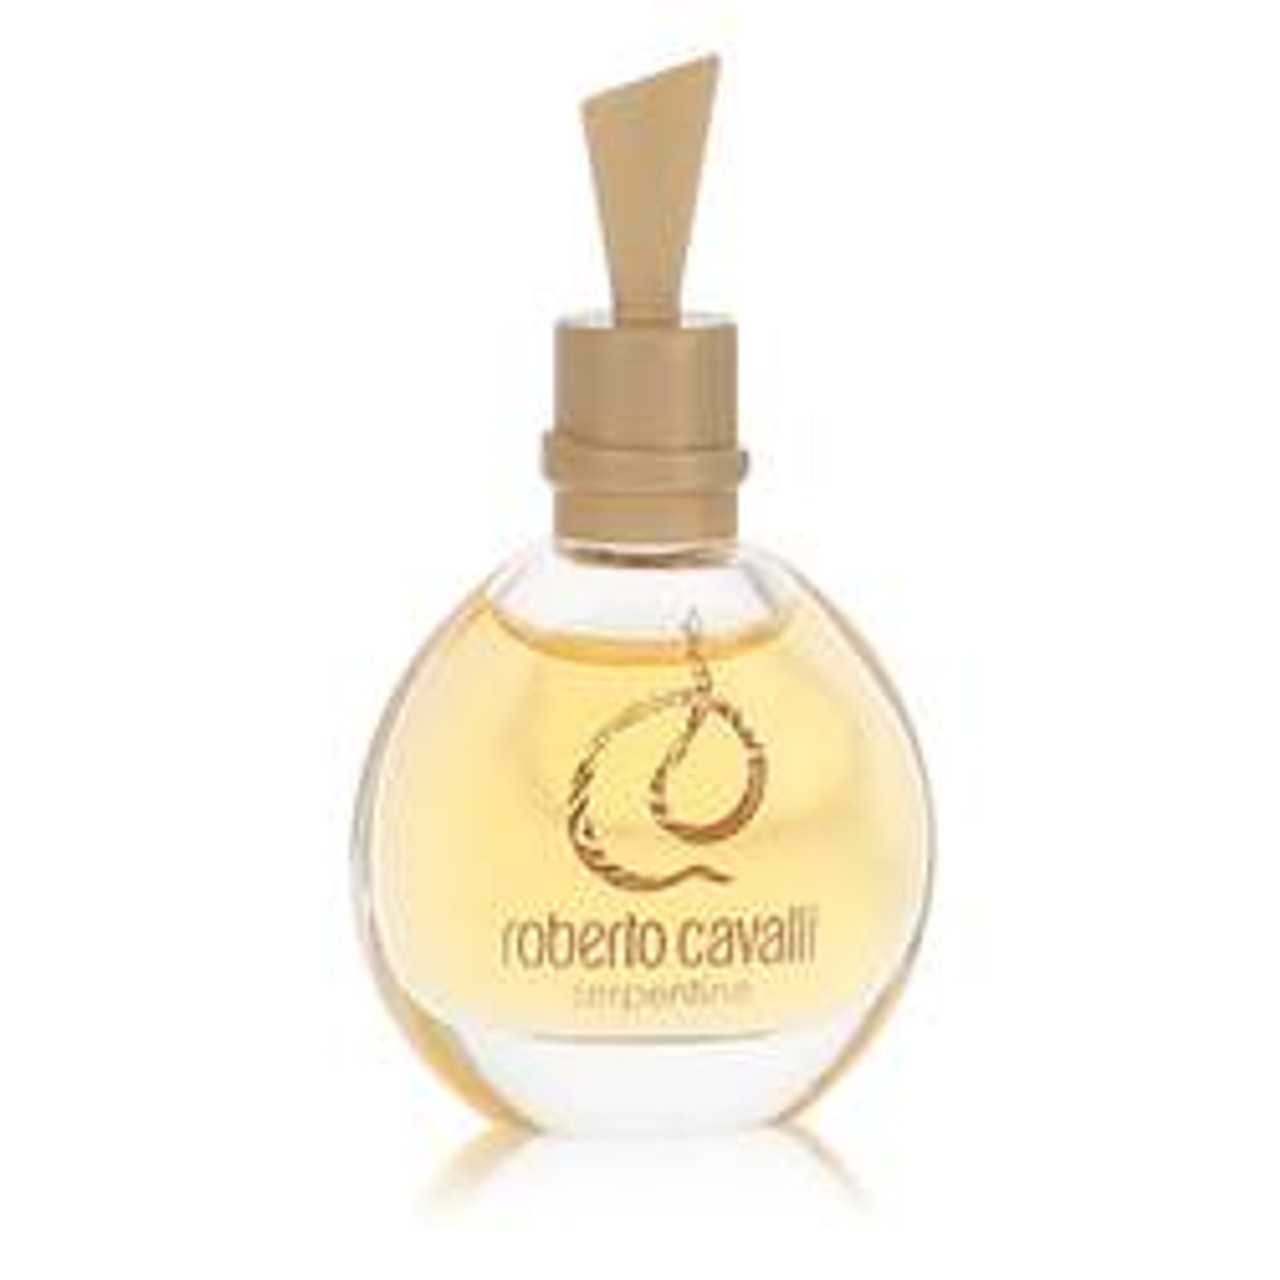 Serpentine Perfume By Roberto Cavalli Mini EDP 0.17 oz for Women - [From 15.00 - Choose pk Qty ] - *Ships from Miami